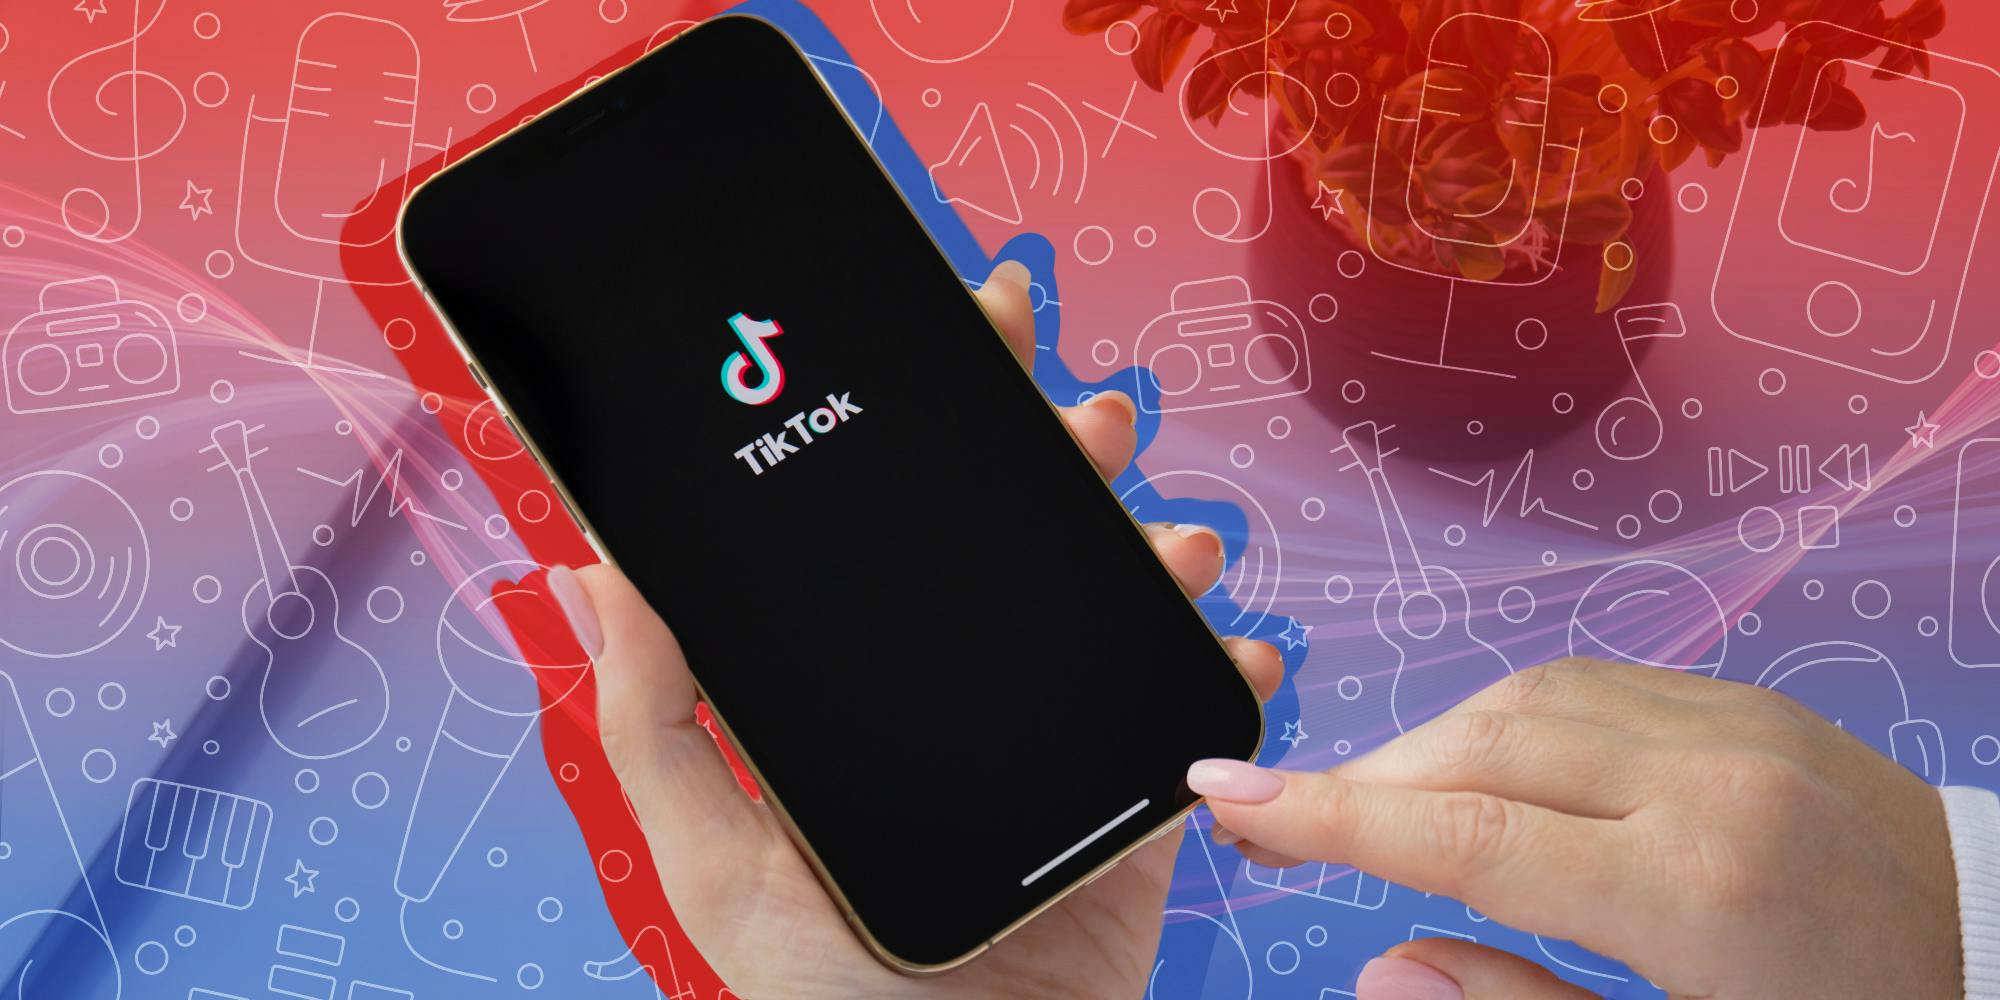 TikTok 101: Everything You Need to Know About Making Original Sounds